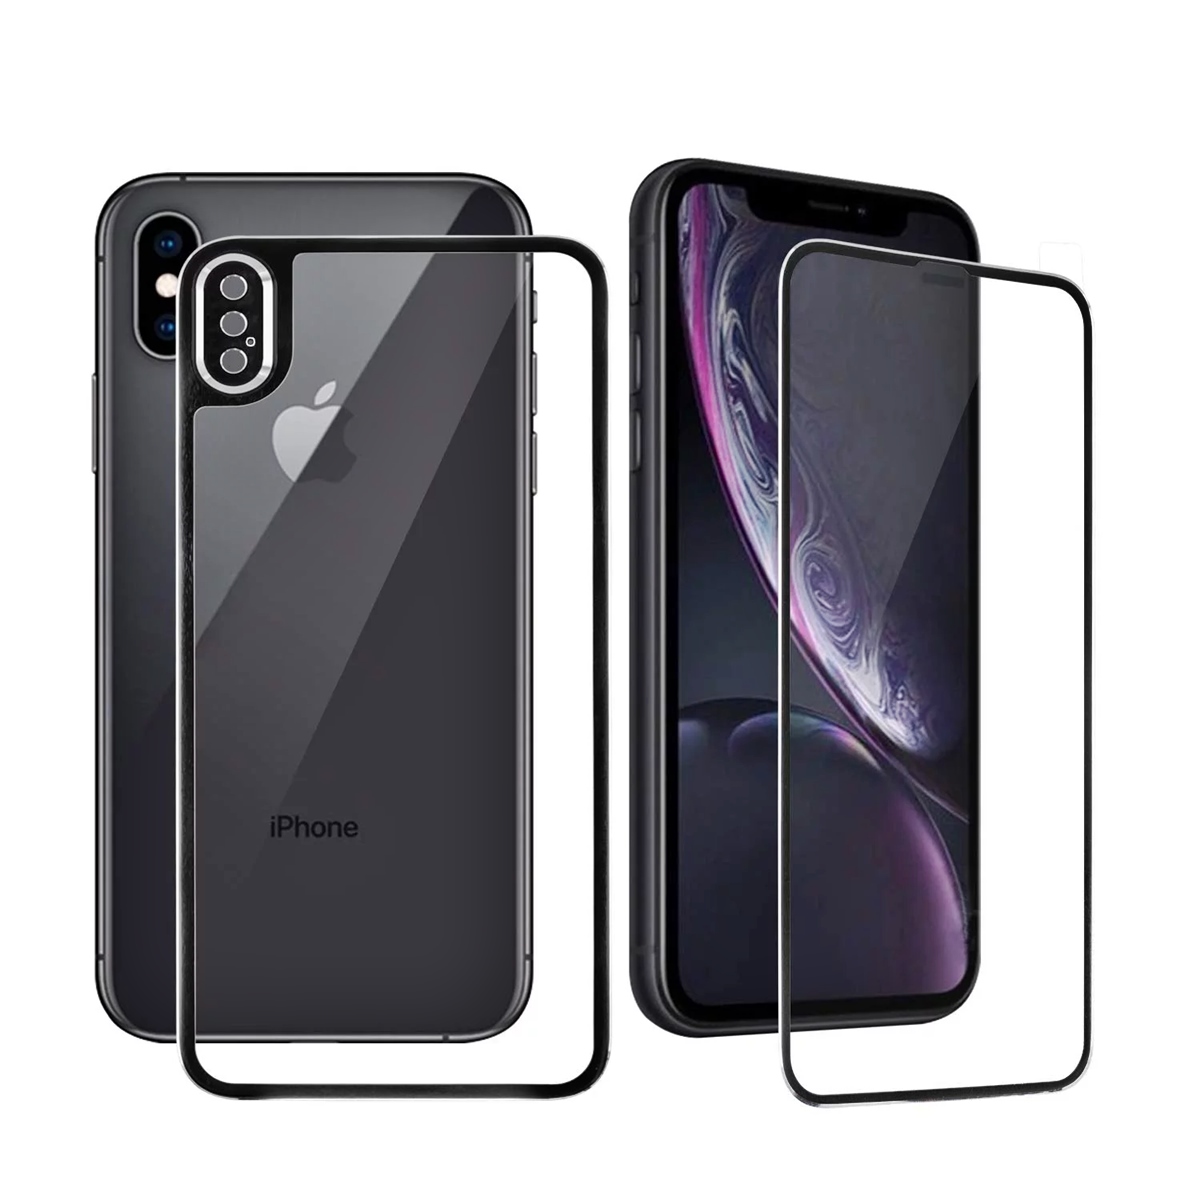 10-best-iphone-xs-screen-protectors-that-you-can-buy